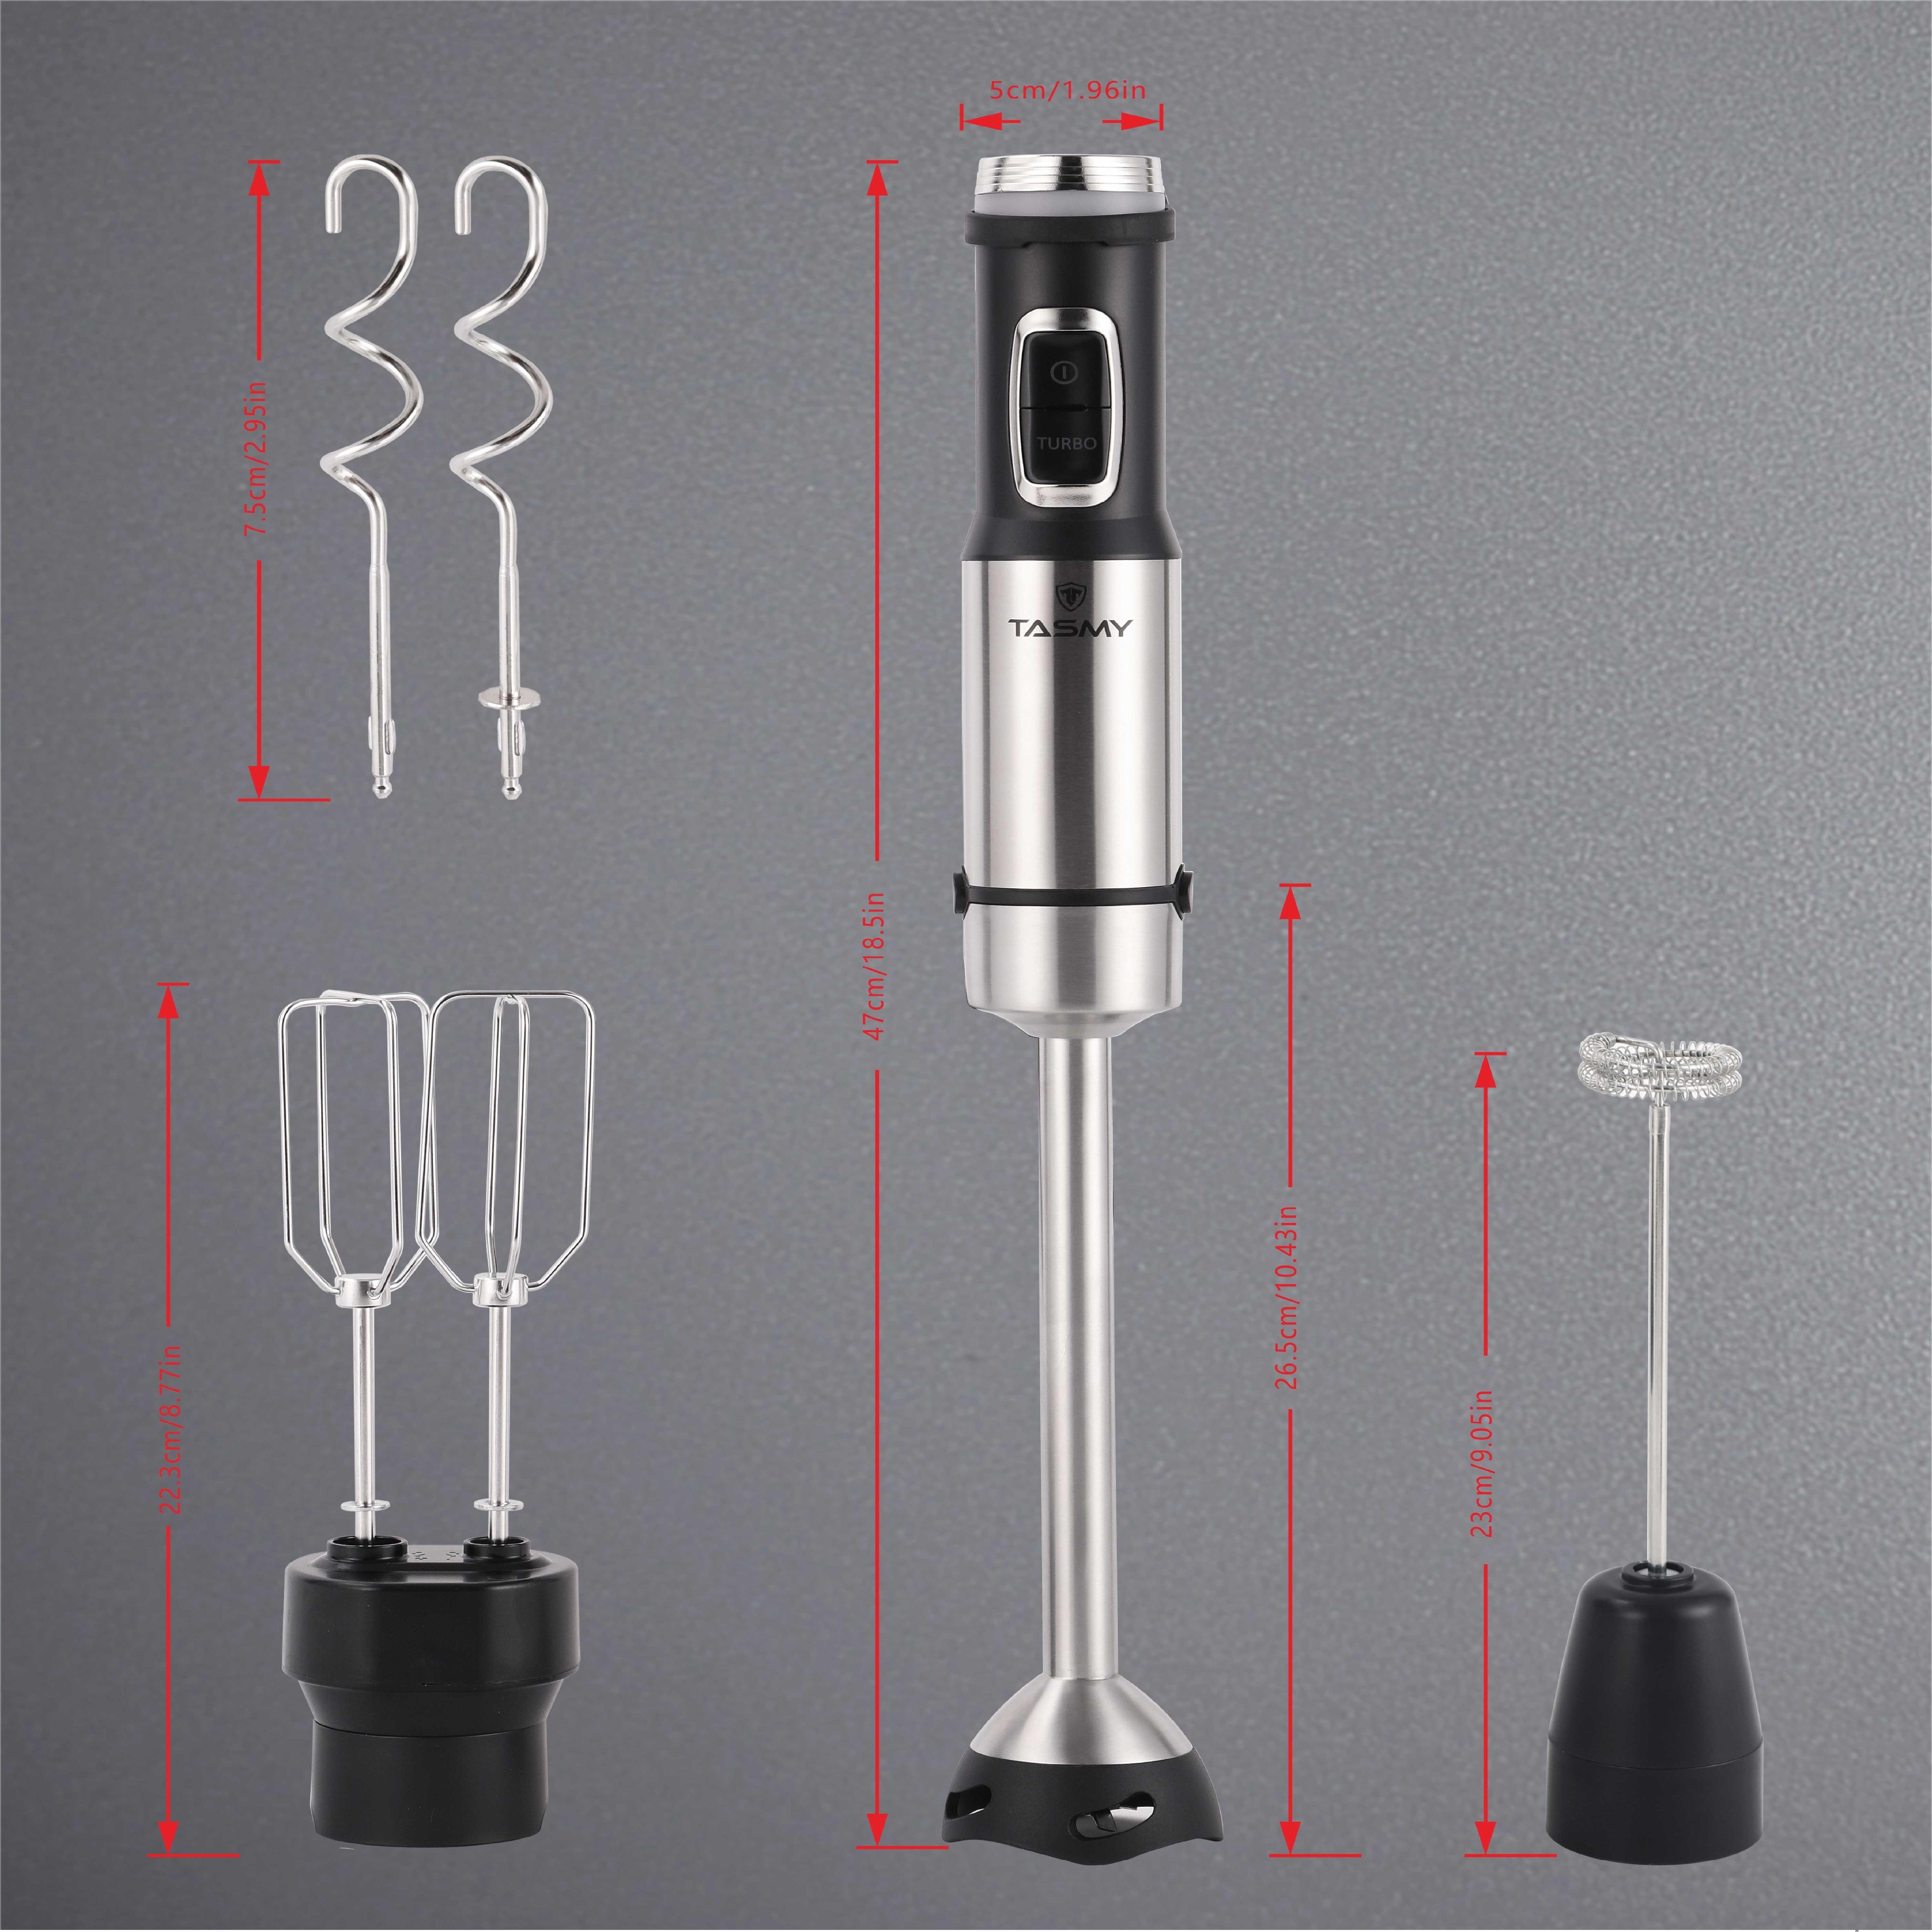 Immersion Blender Handheld Electric Mixer Stainless Steel With